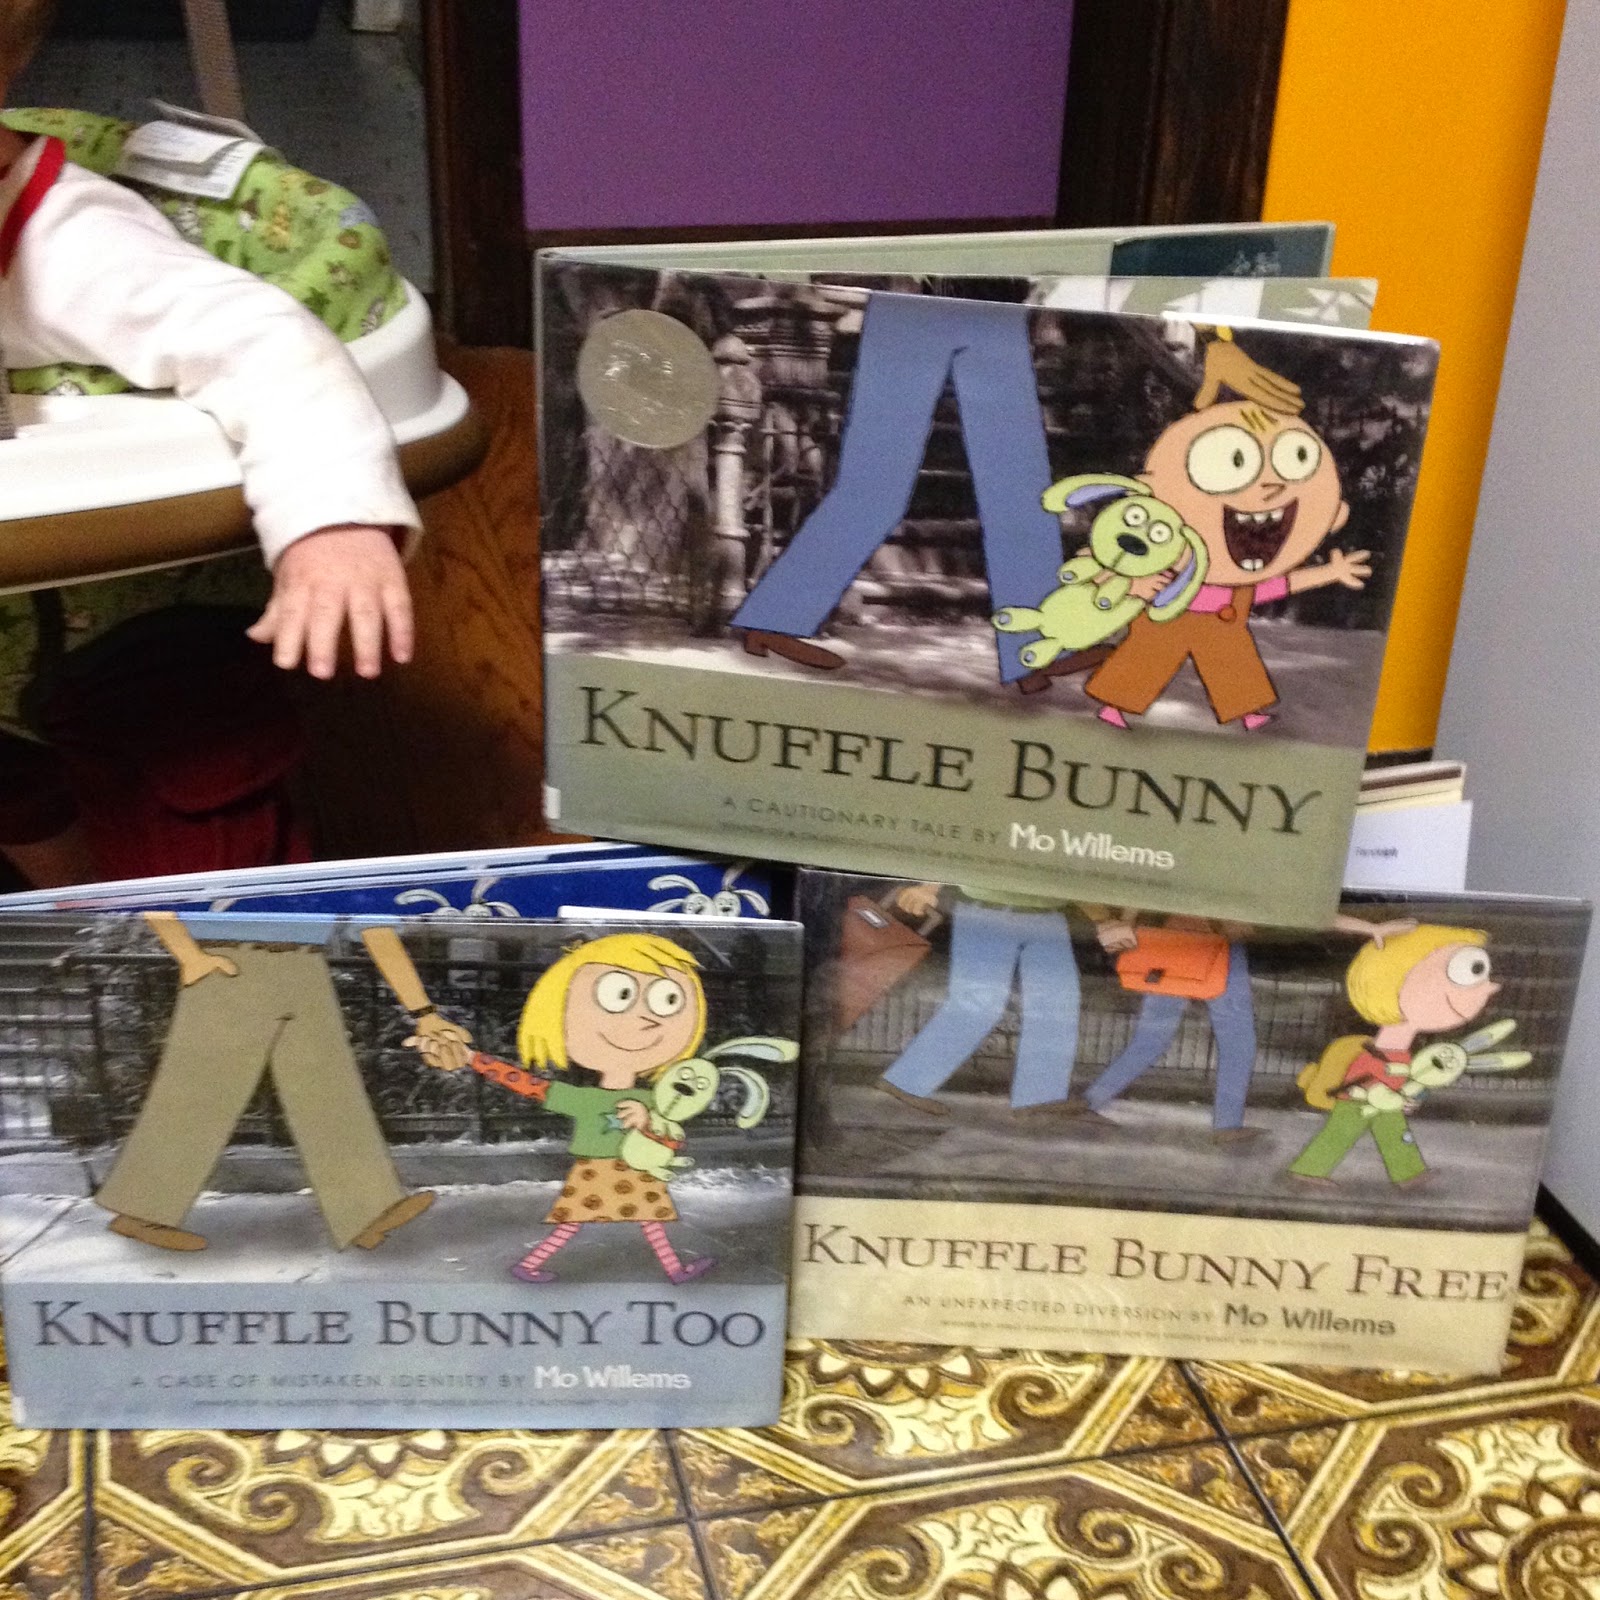 How I Feel About Books: The Knuffle Bunny Trilogy